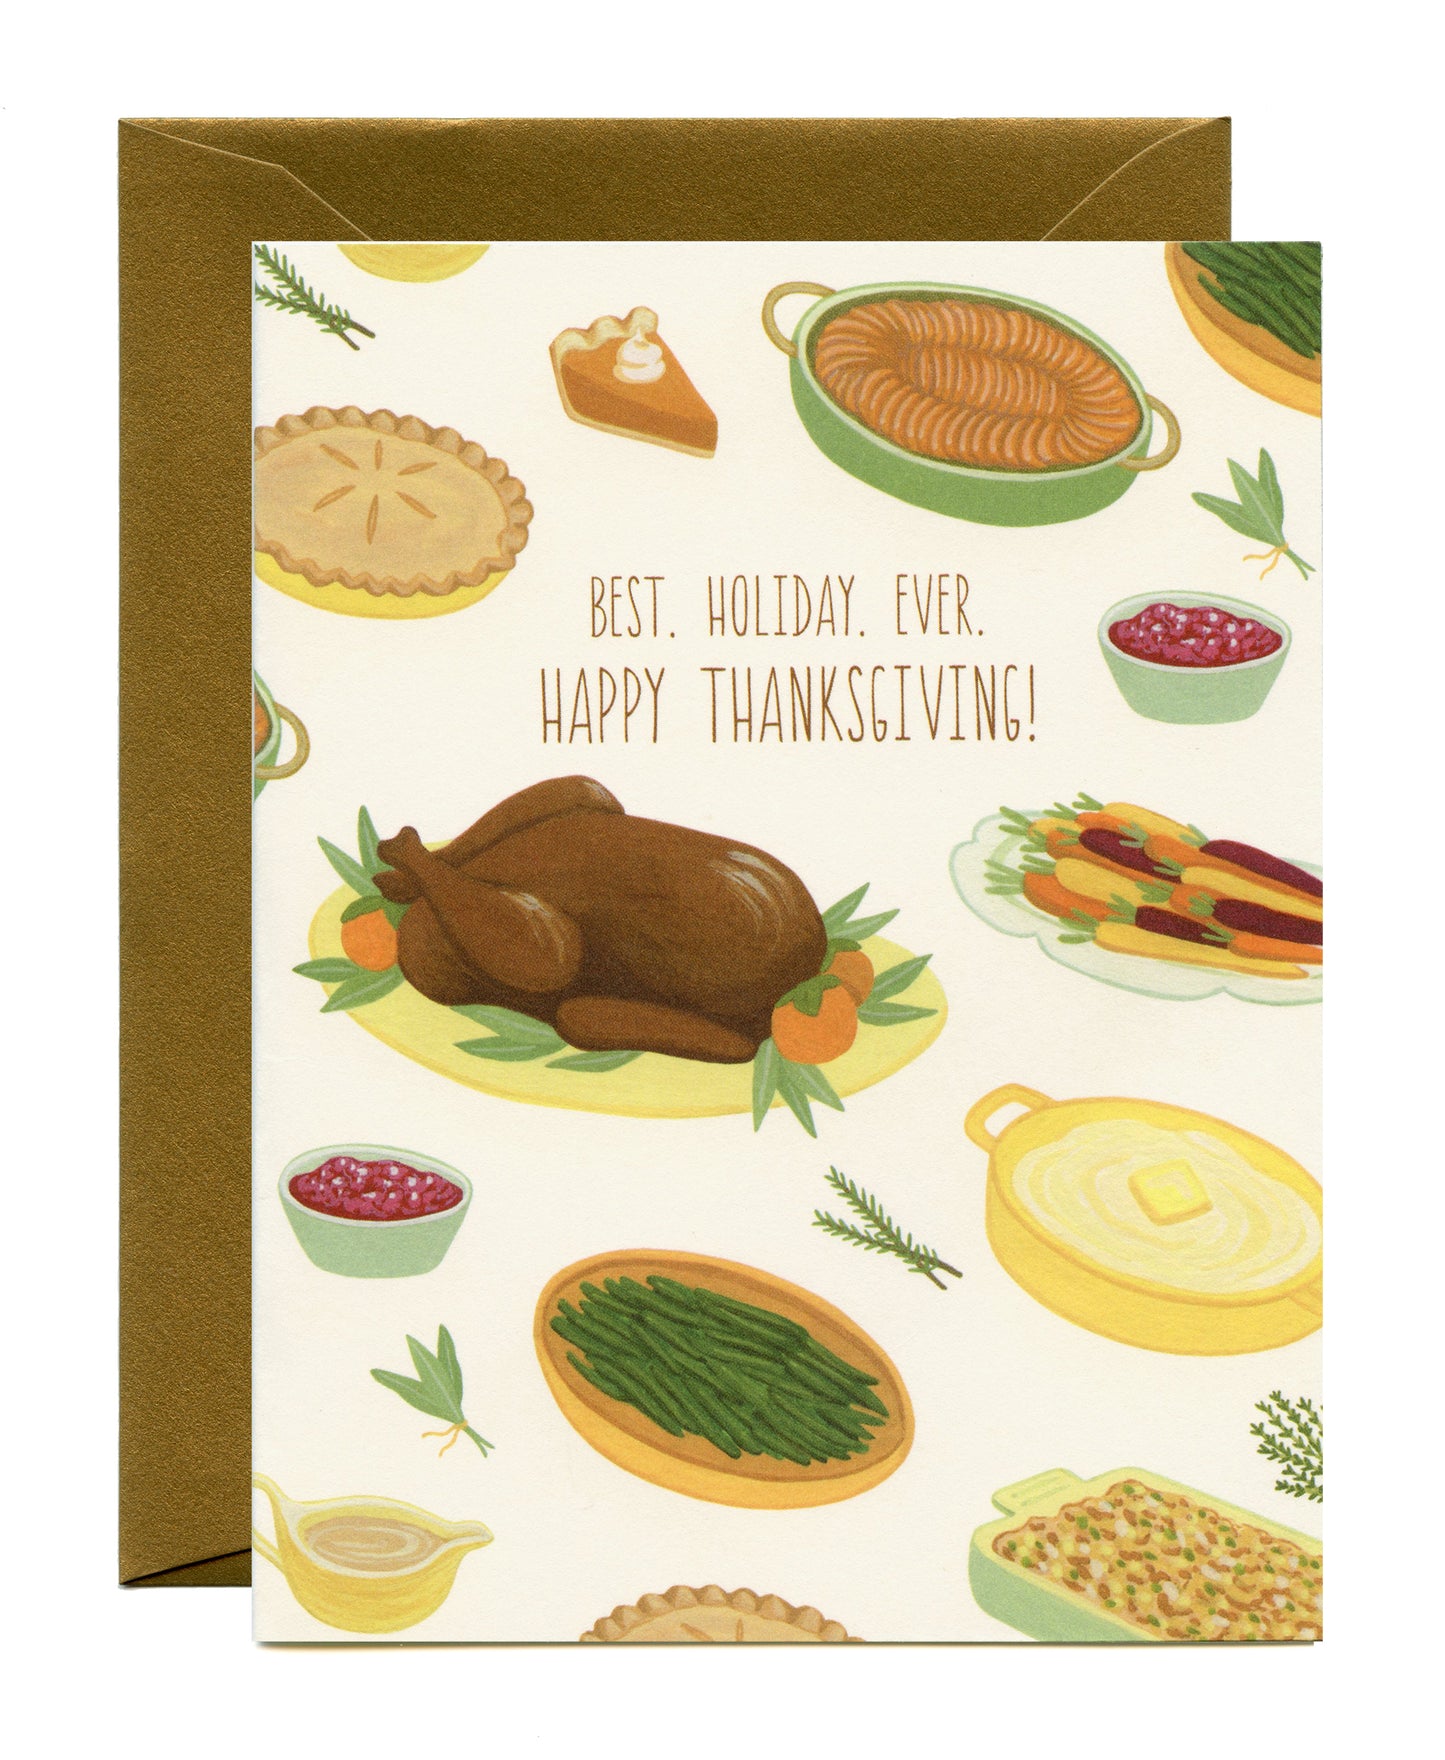 BEST HOLIDAY EVER - THANKSGIVING GREETING CARD